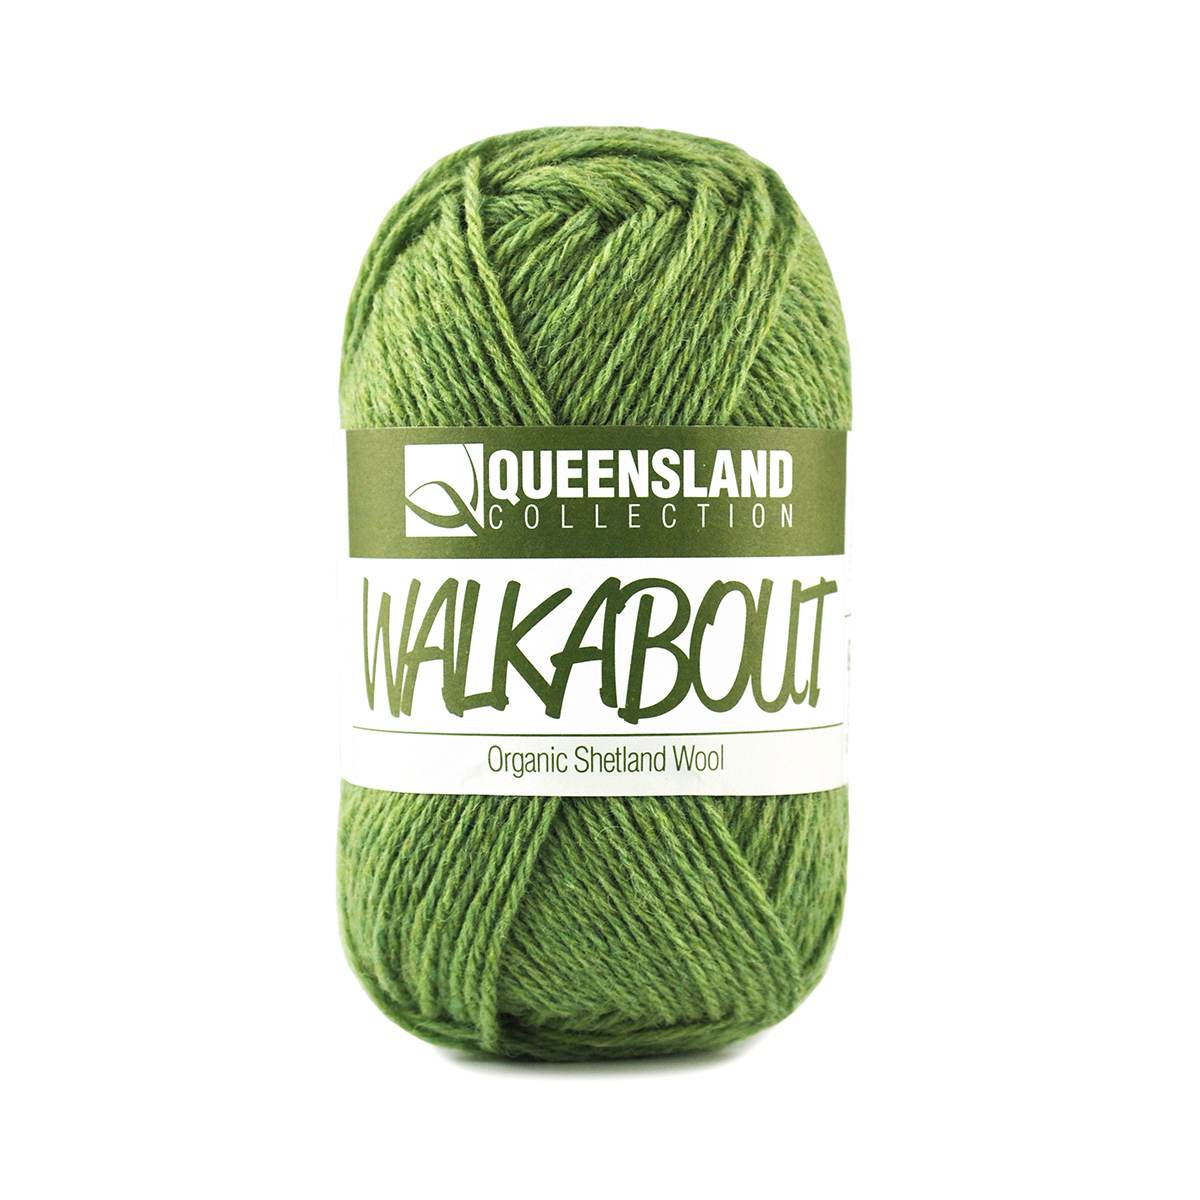 a skein of Walkabout